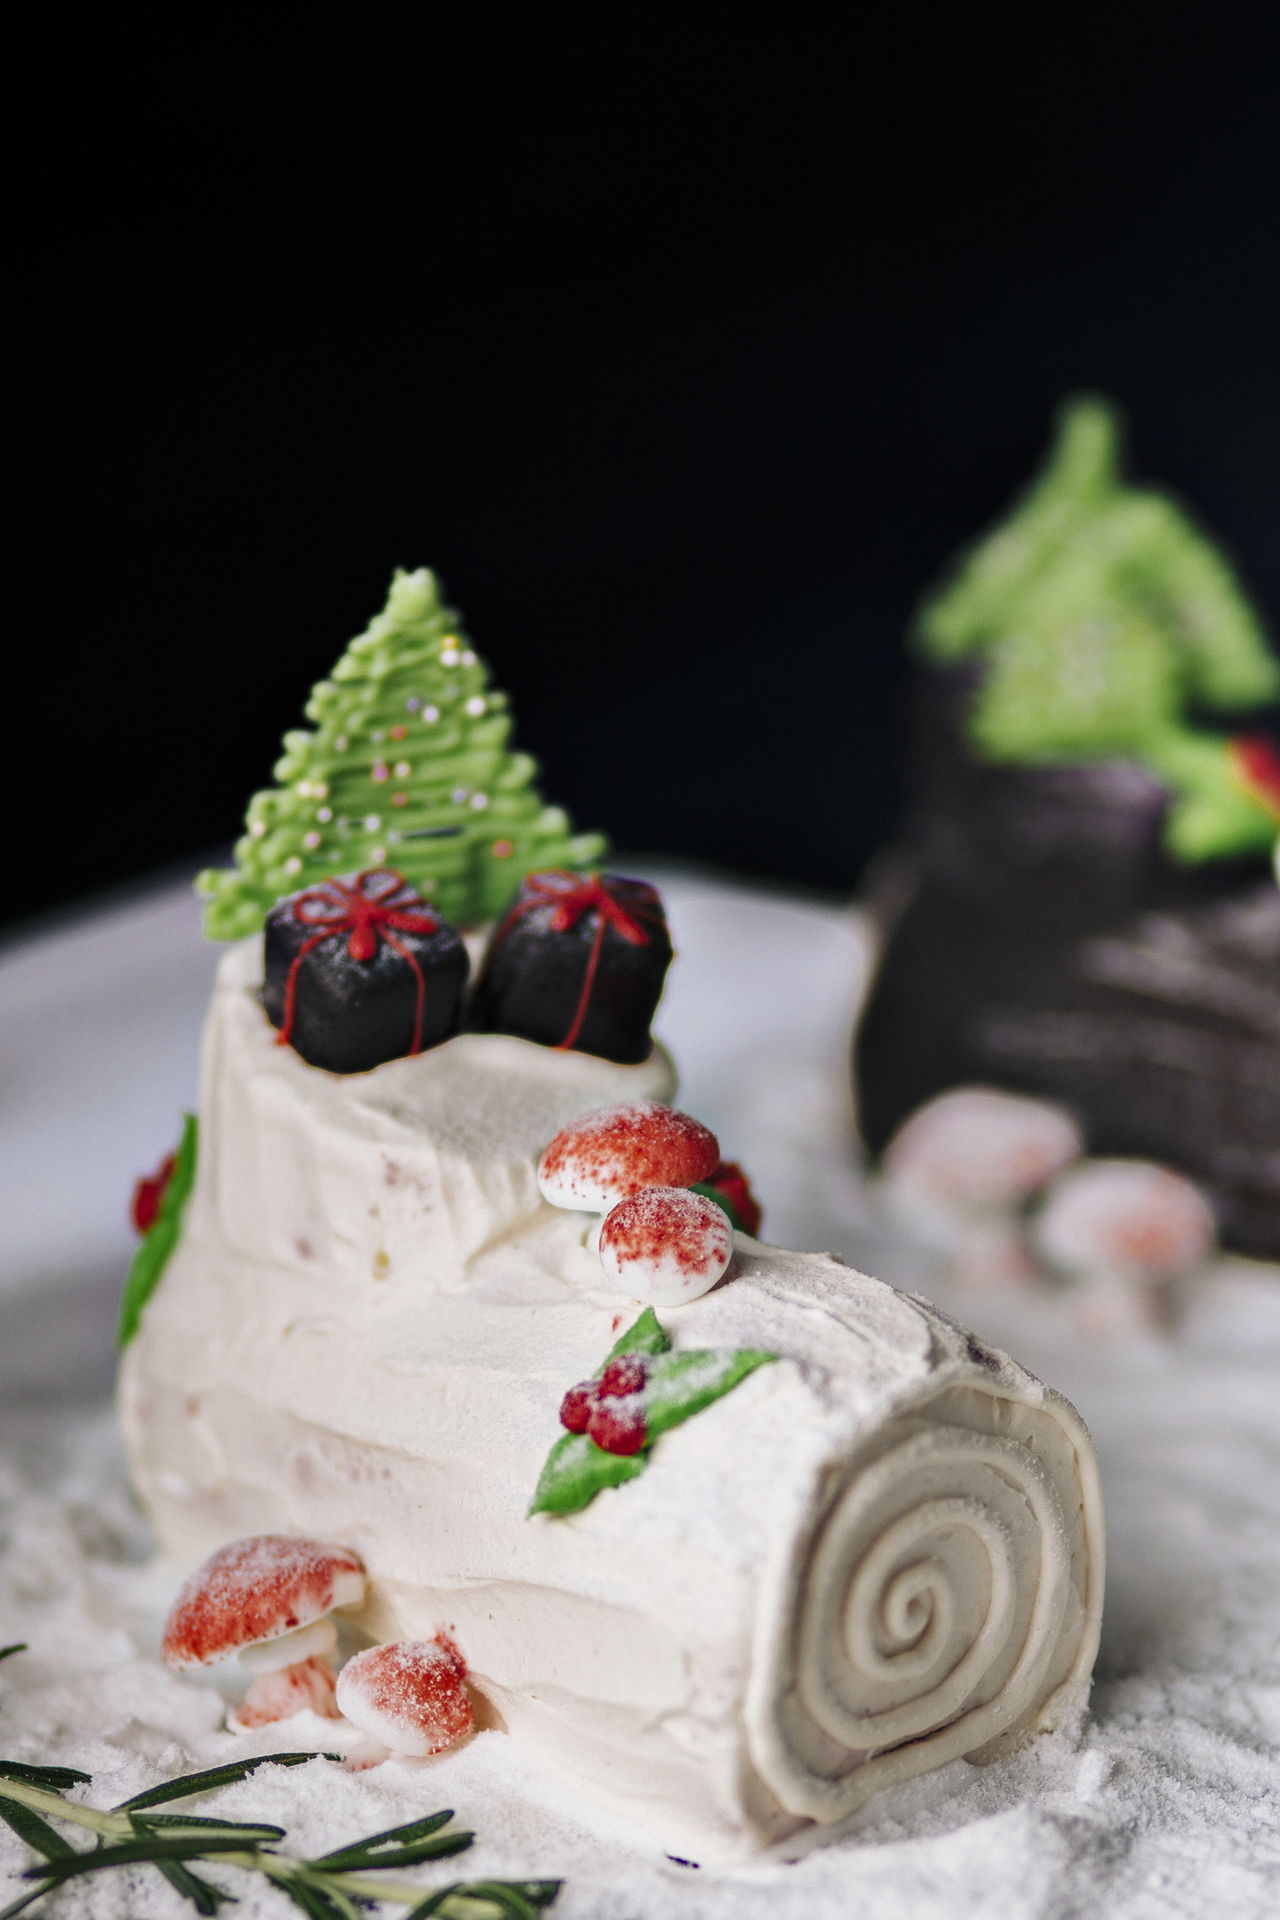 History of the Delicious Buche de Noel and How it is Made